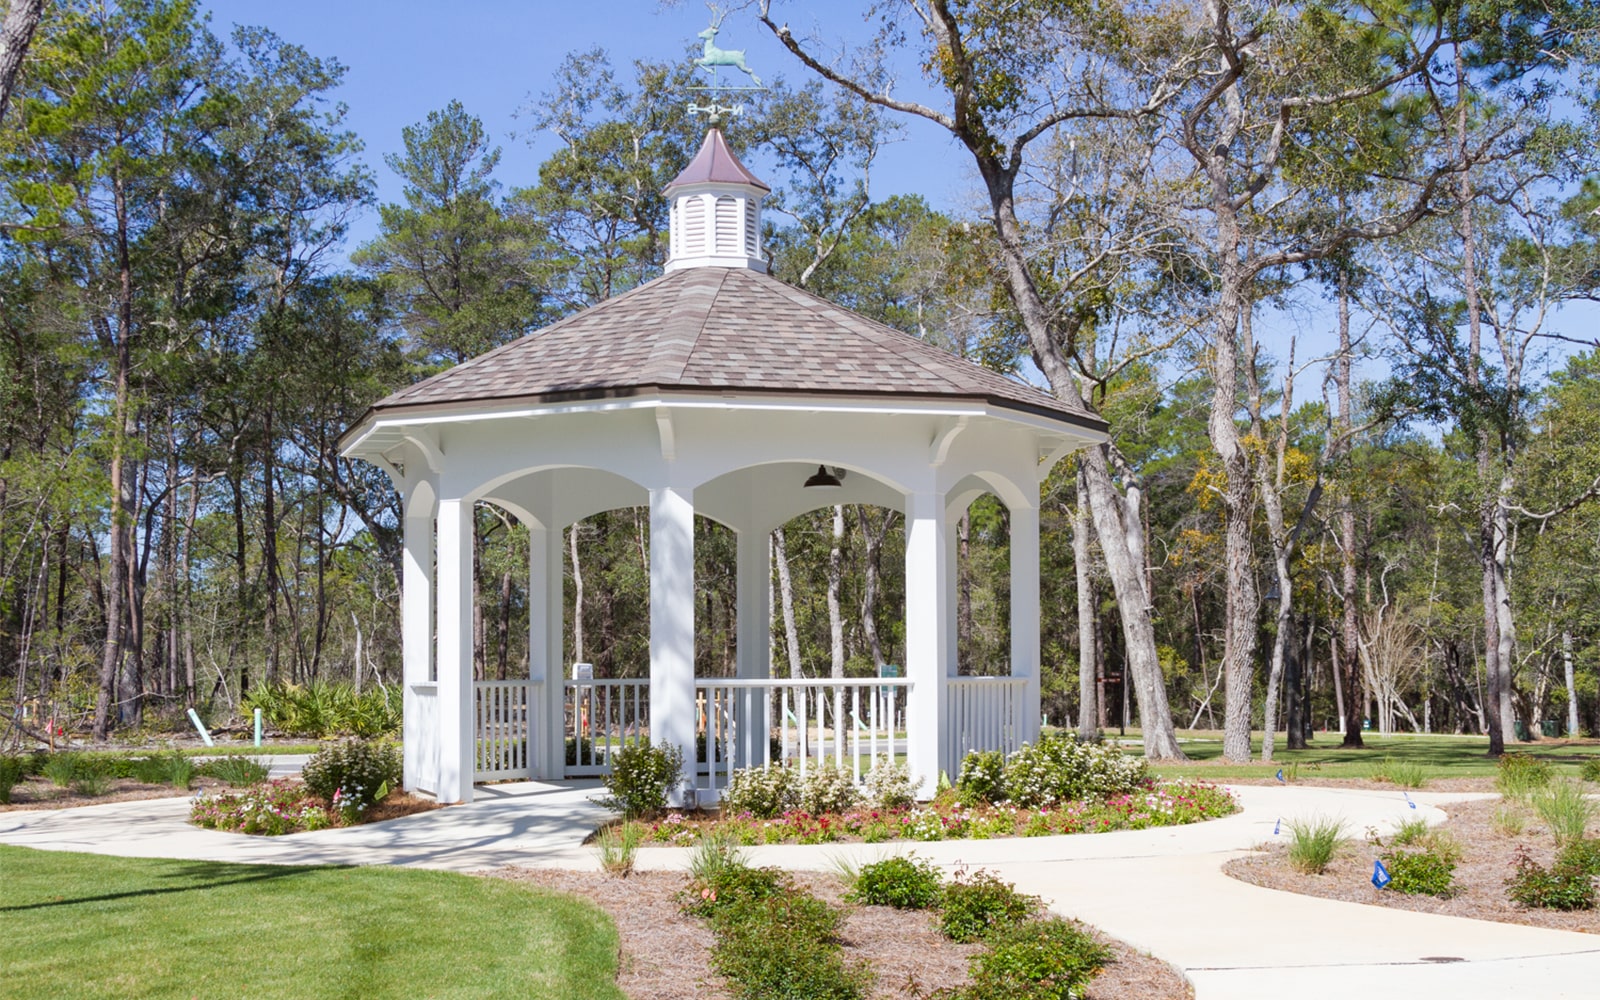 White gazebo sits in the middle of trees and gardens